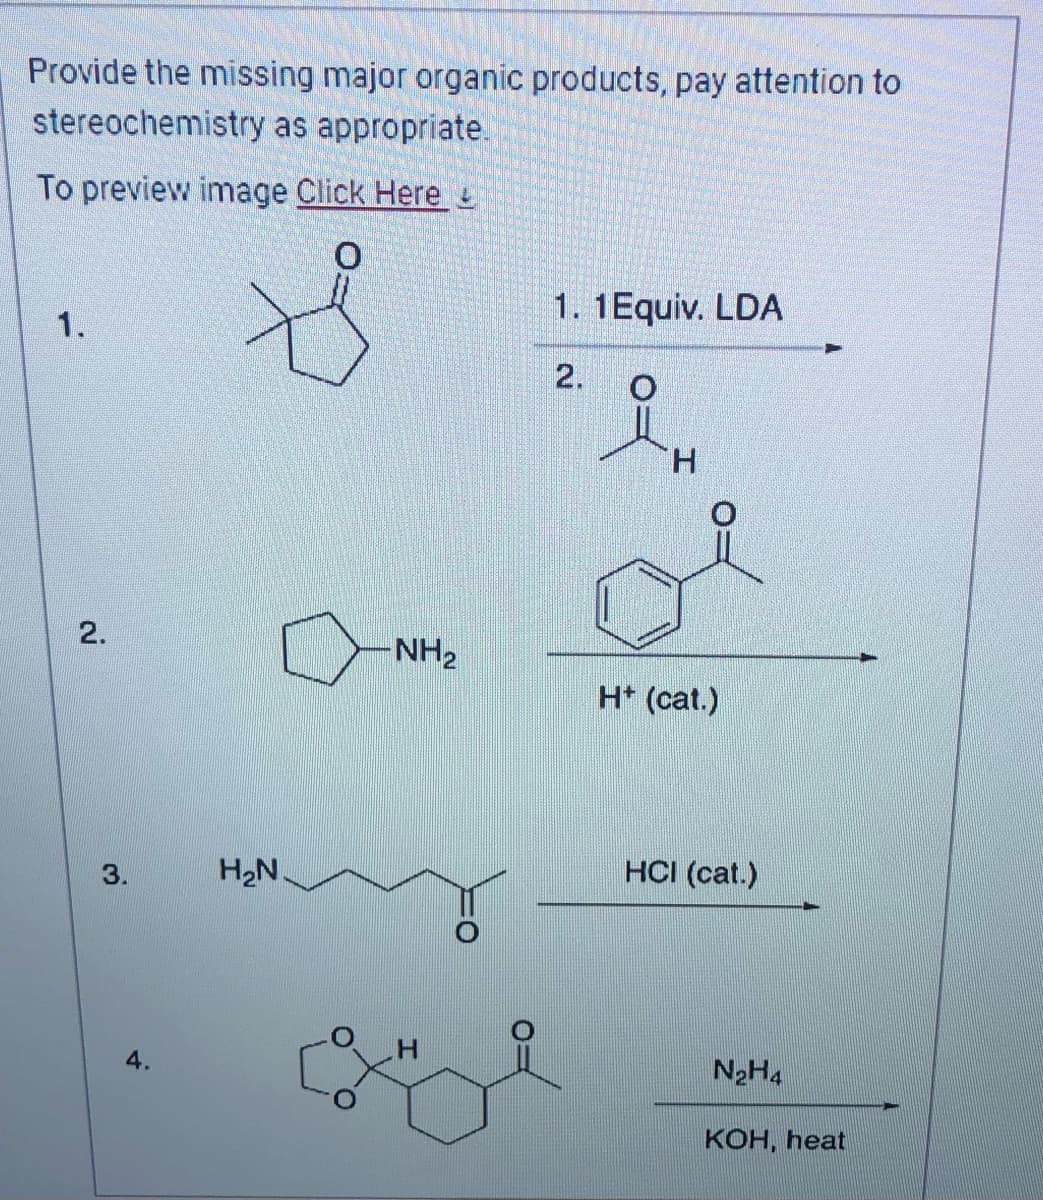 Provide the missing major organic products, pay attention to
stereochemistry as appropriate.
To preview image Click Here
0
1.
2.
3.
4.
H₂N.
-NH₂
1. 1 Equiv. LDA
2. O
H
H+ (cat.)
HCI (cat.)
N₂H4
KOH, heat